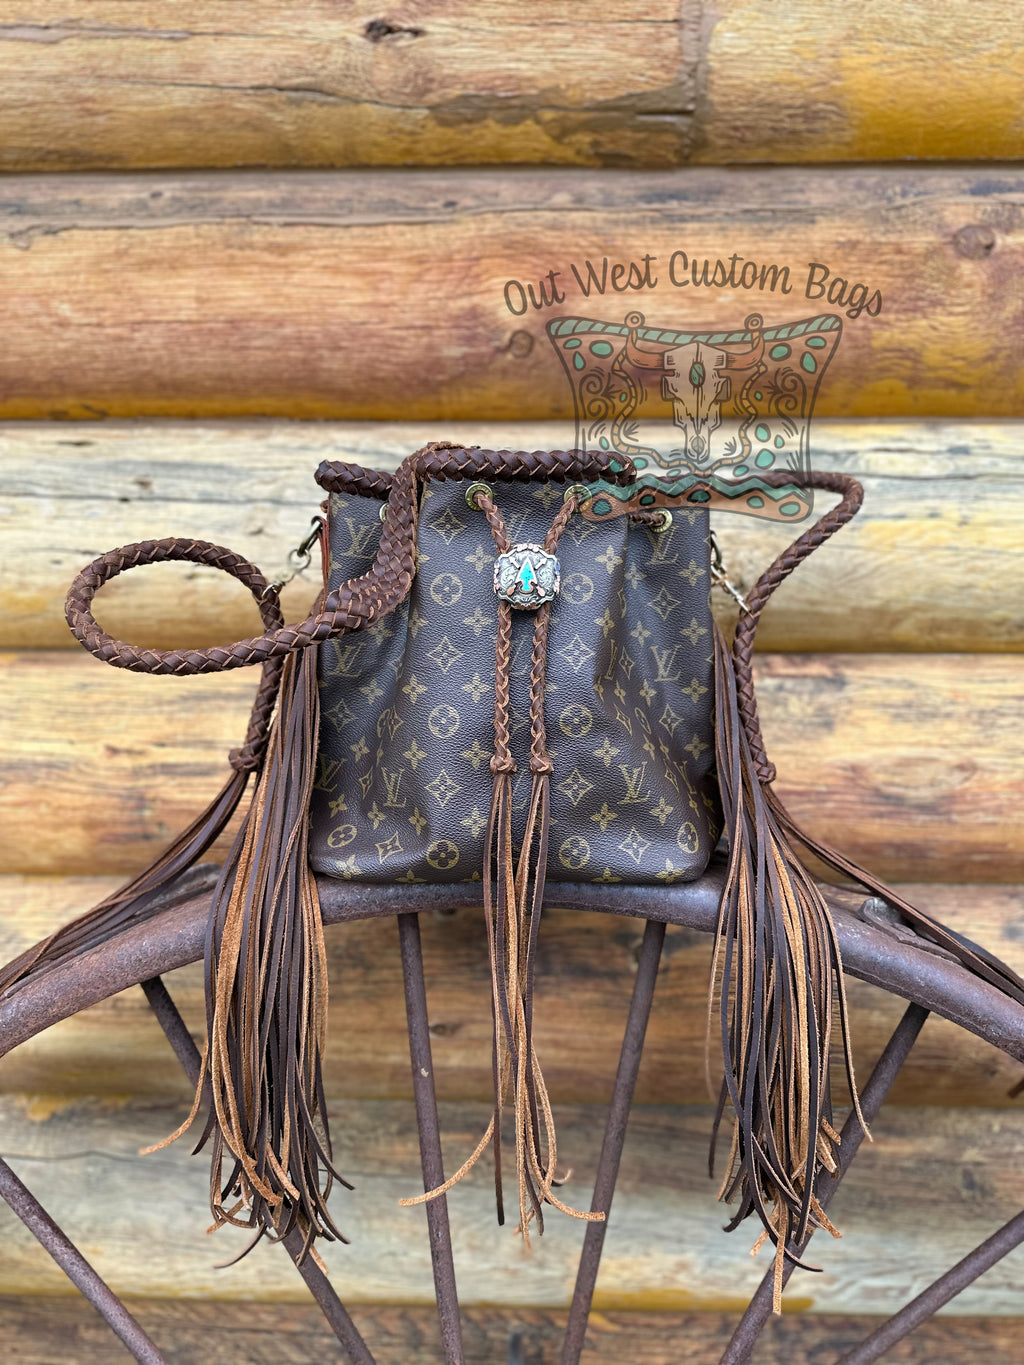 Out West Custom Bags – Out West Custom Bags